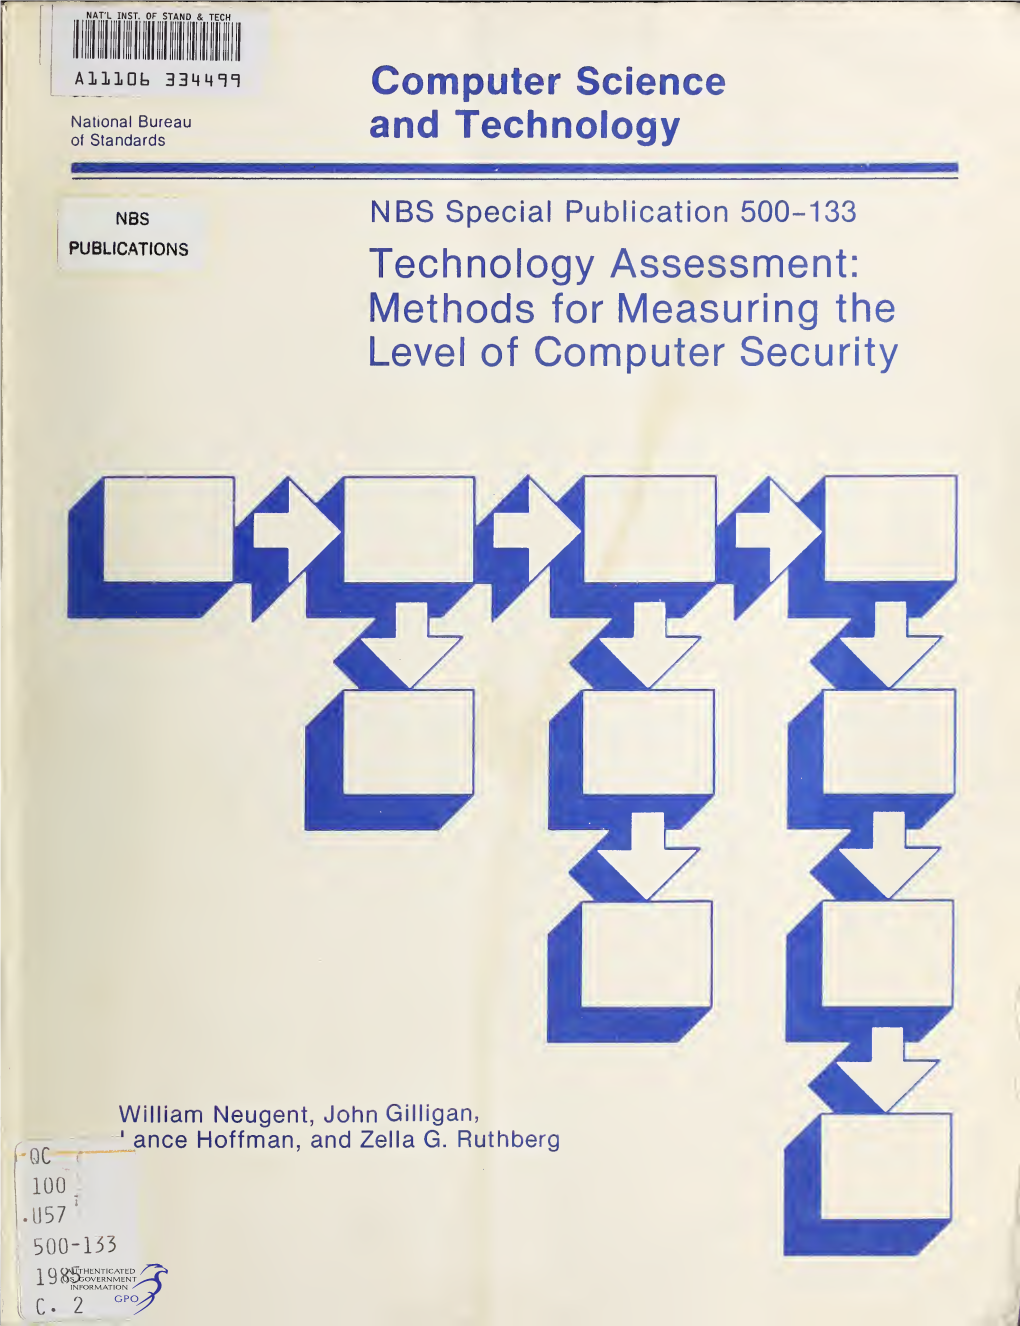 Technology Assessment: Methods for Measuring the Level of Computer Security